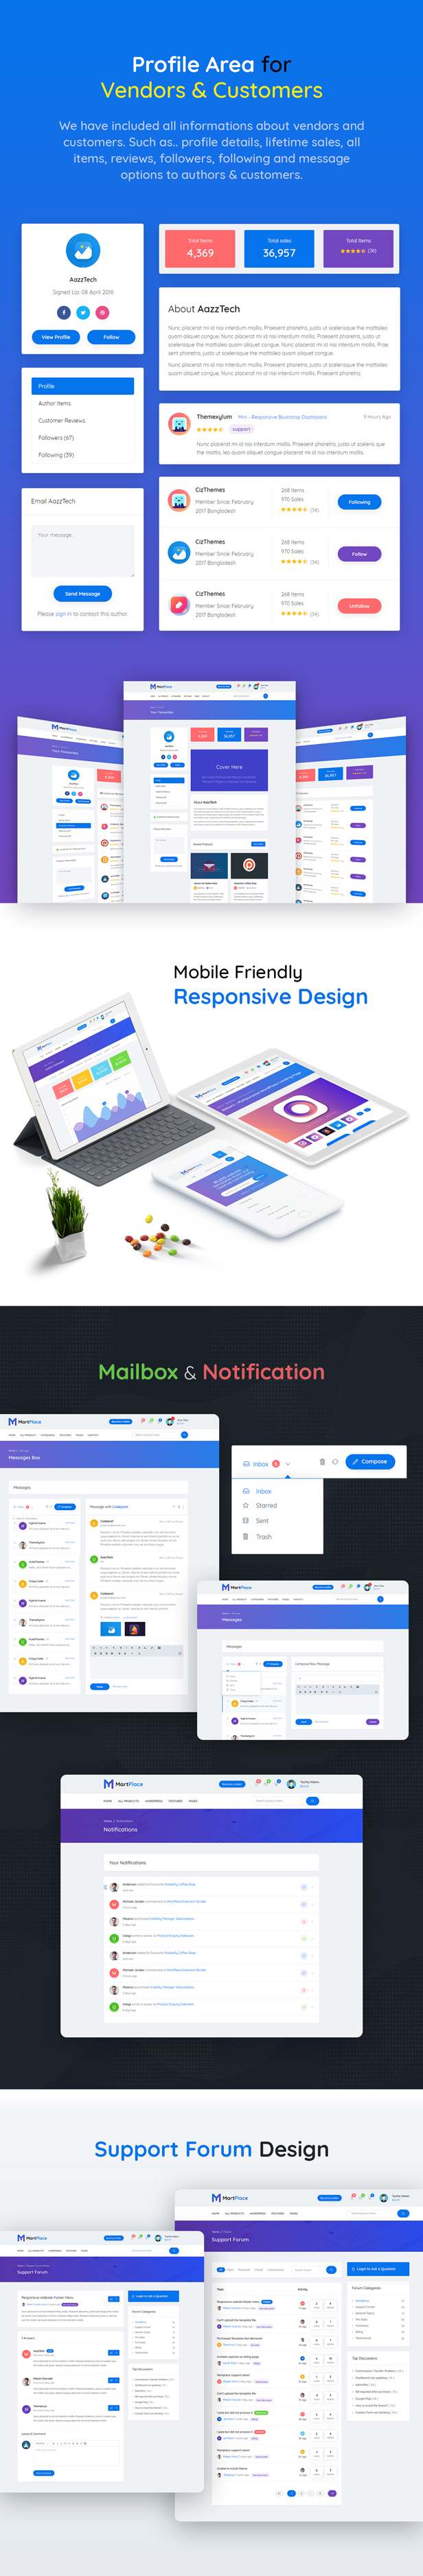 MartPlace - Multipurpose Online Marketplace HTML Template with Dashboard - 6